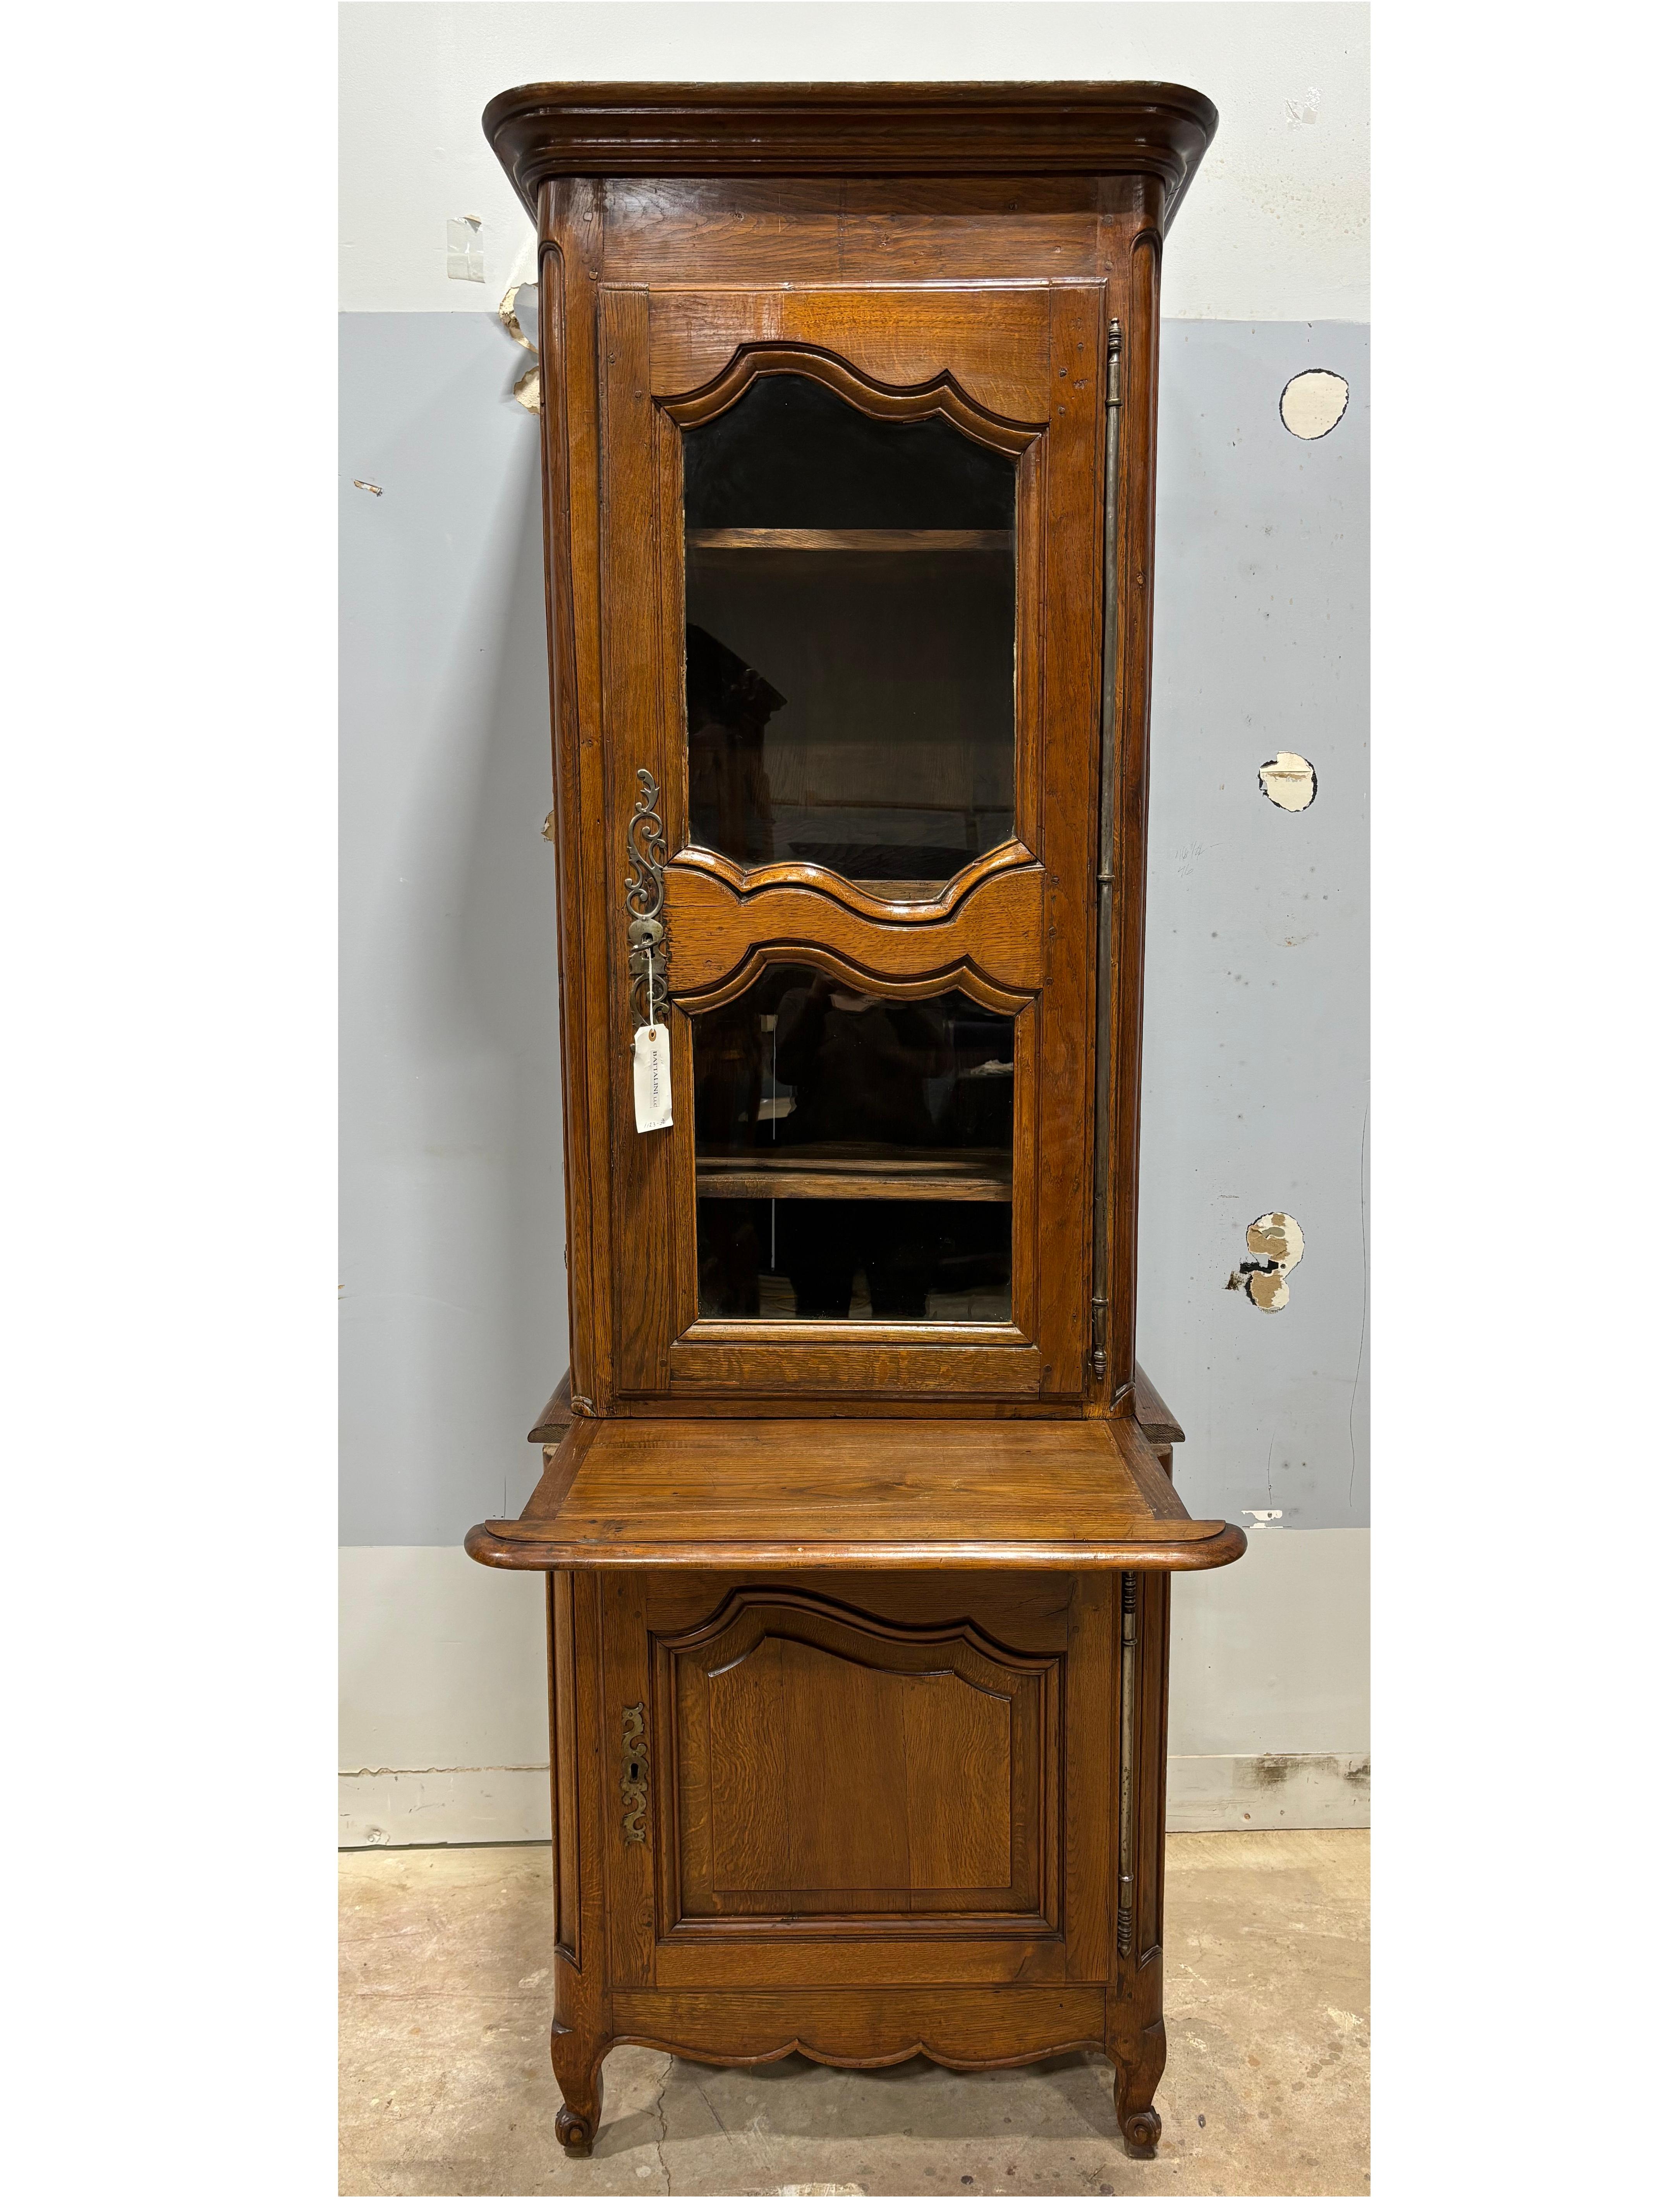 It is a very interesting piece. It is a cabinet confiturier 2 corps, it comes in 3 parts: the base, the top and the crown. It has an extension that slides out and when it is out the depth is 32.5”.